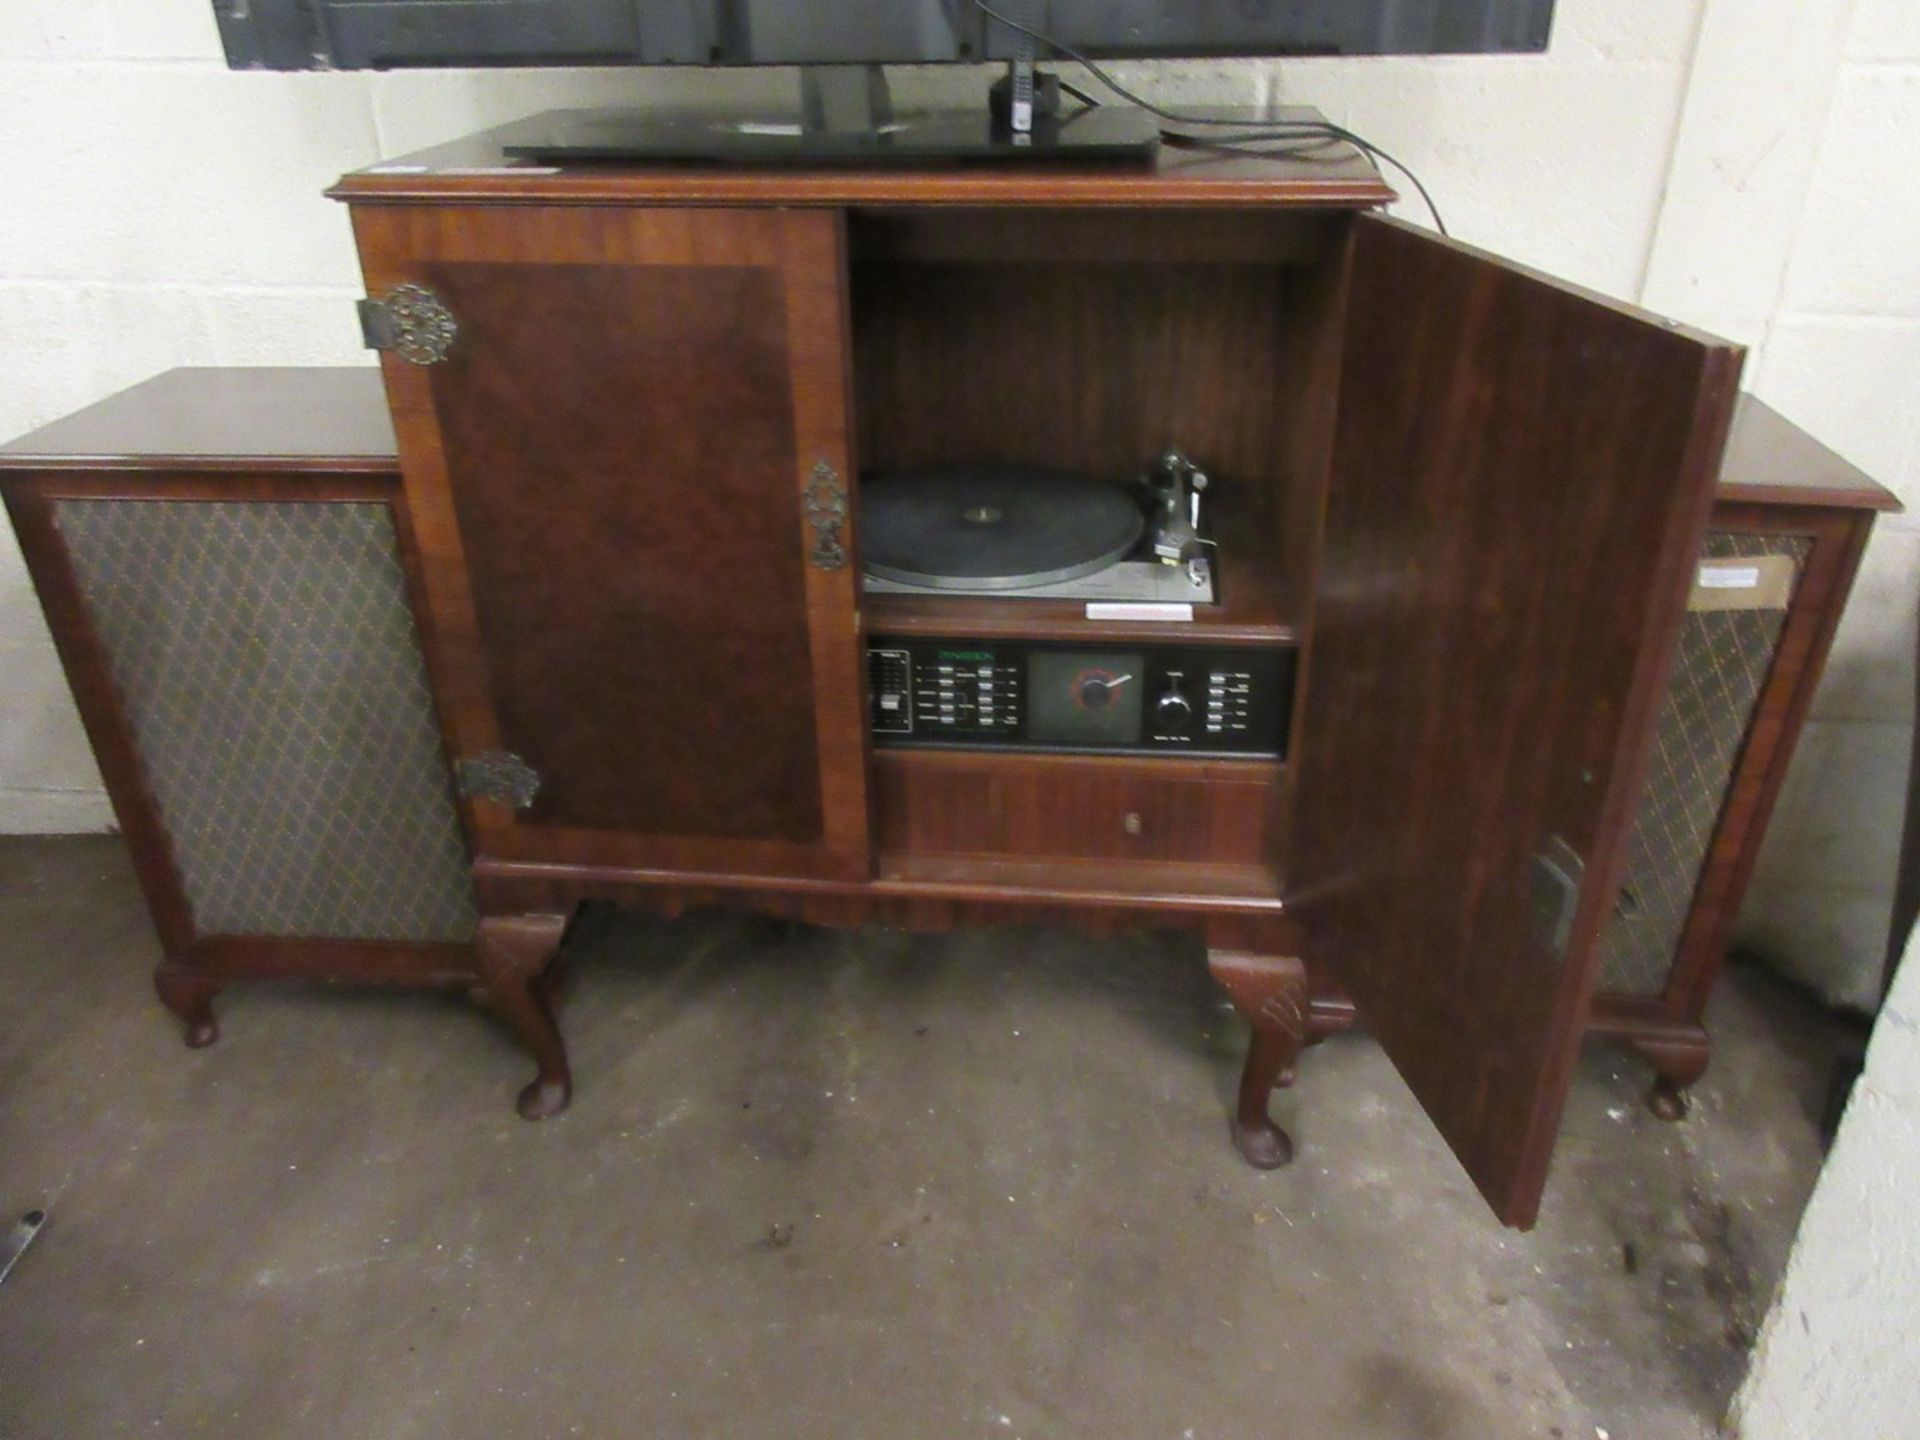 Dynatron music centre model HFC101A circa 1960s/70s, Fitted in reproduction wooden cabinet with